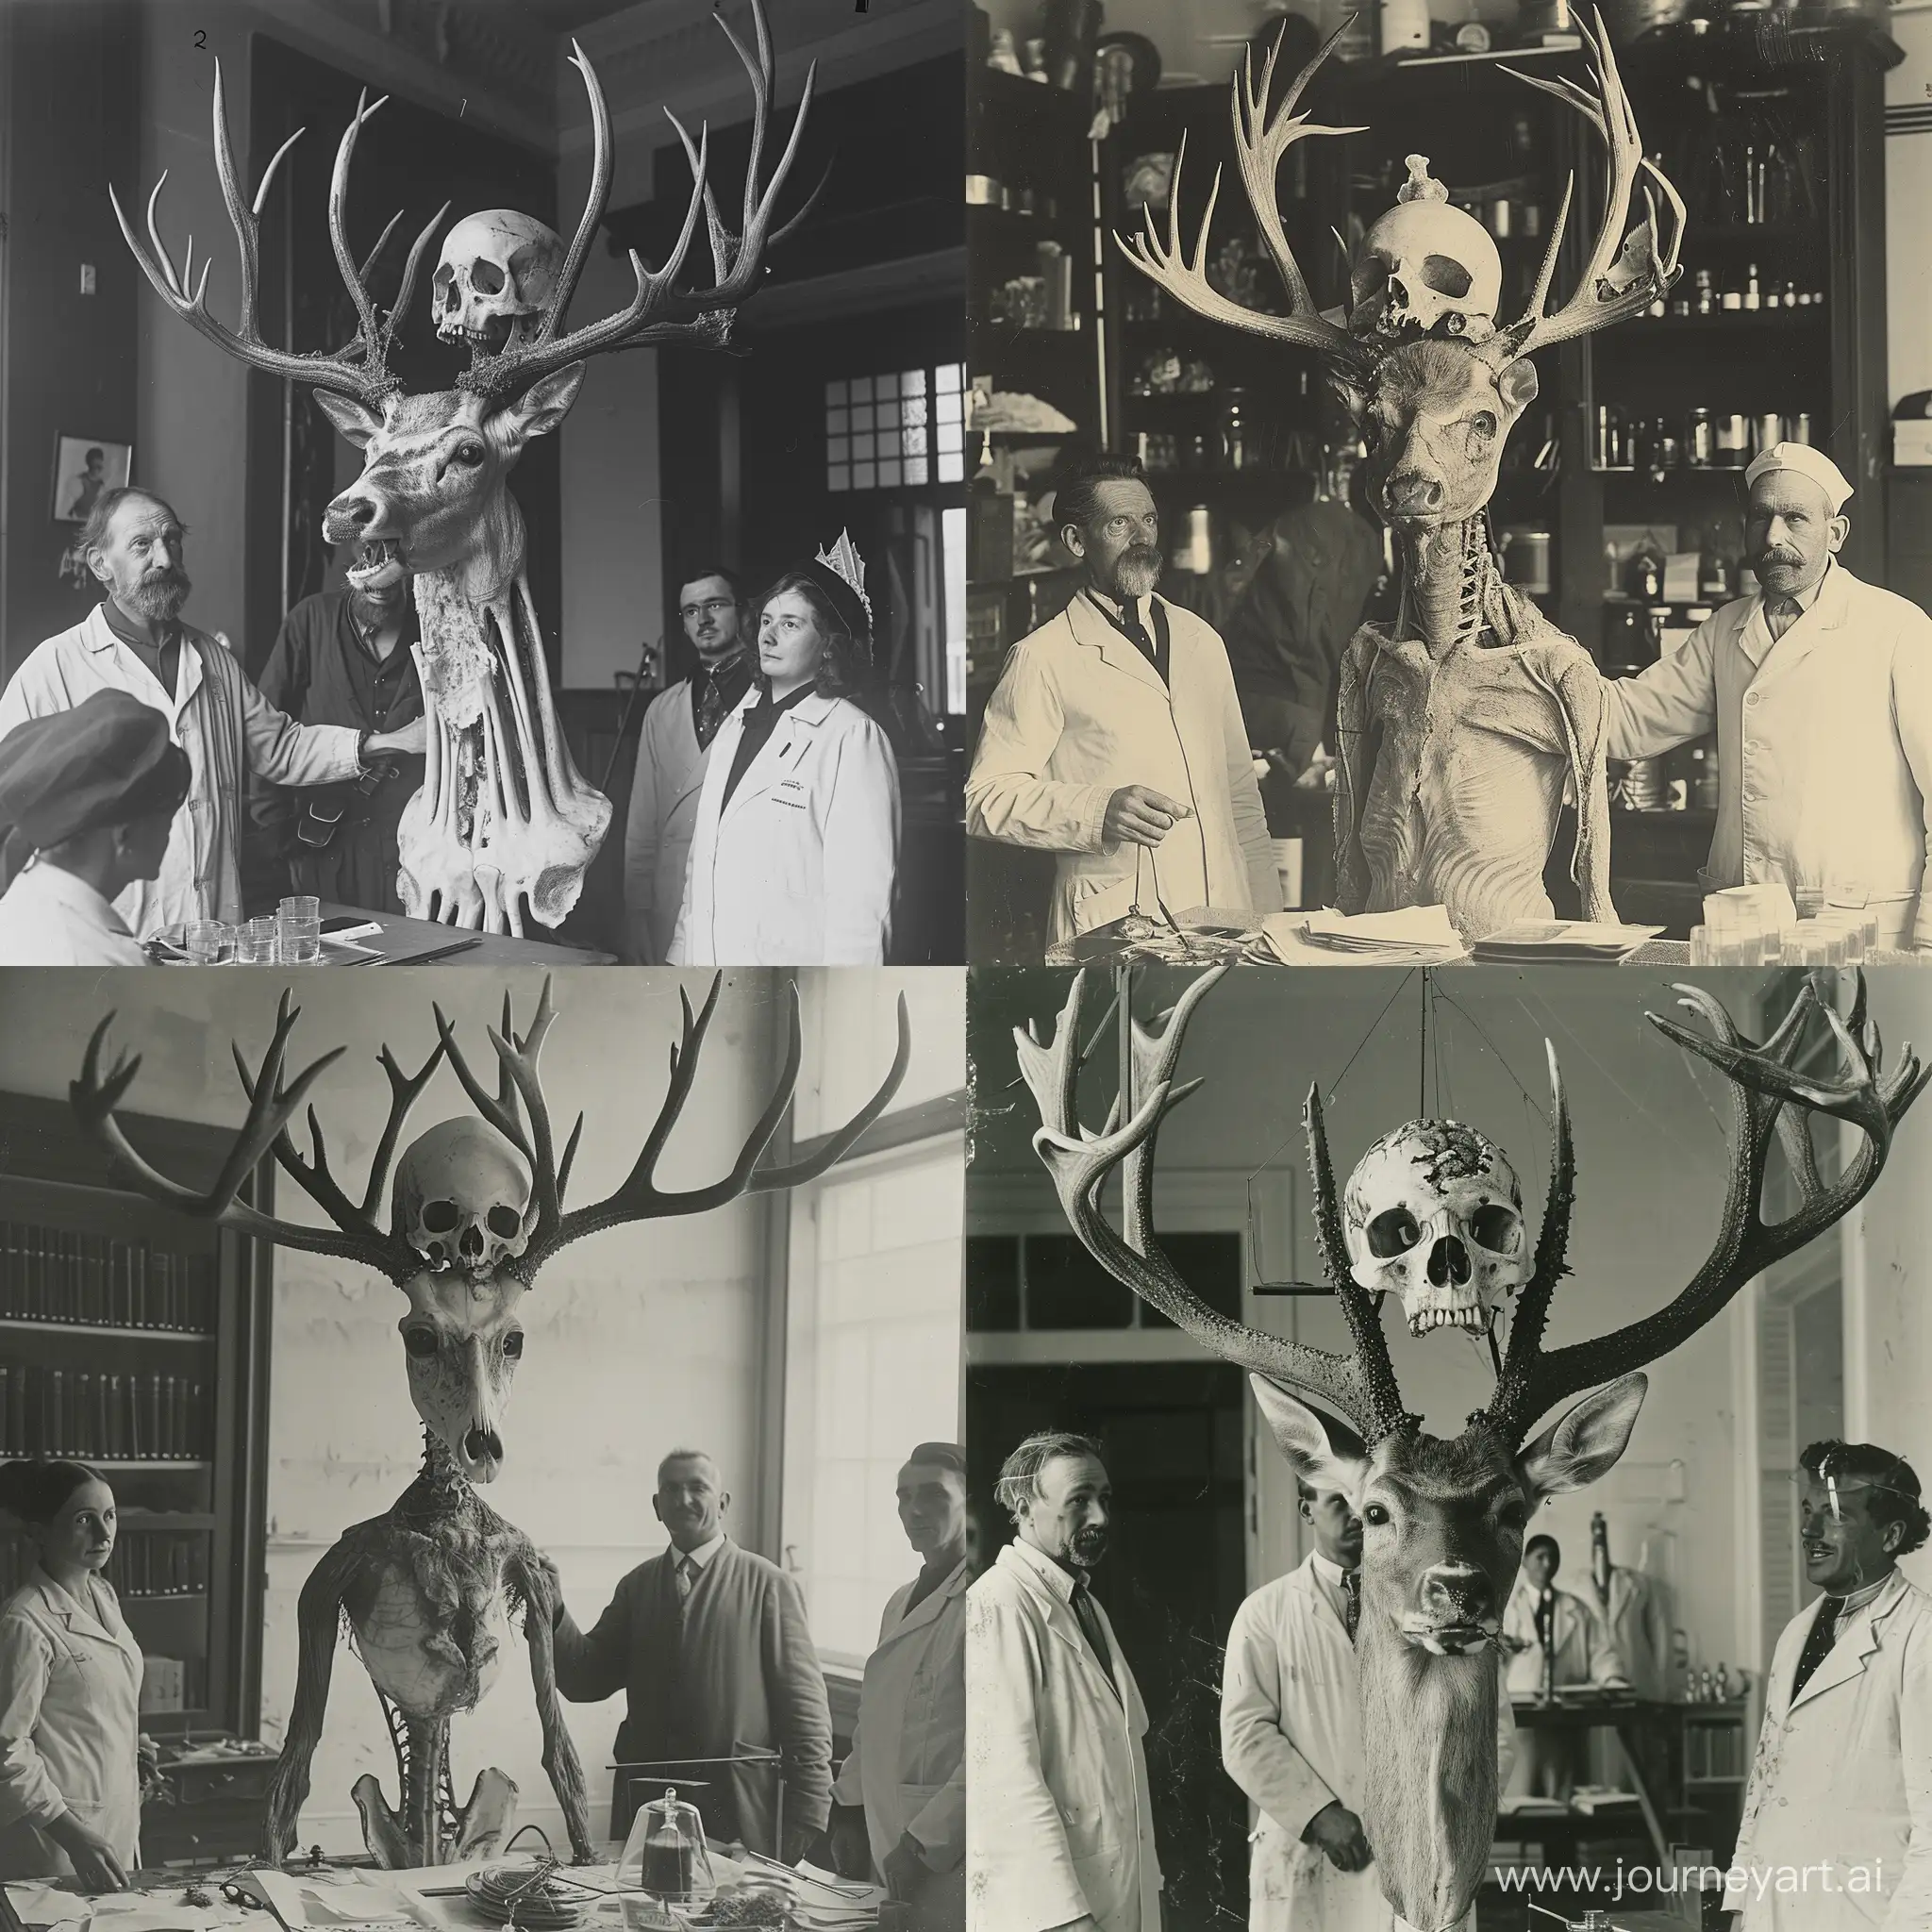 Mysterious-Figure-with-Deer-Skull-and-Scientists-Vintage-20th-Century-Photo